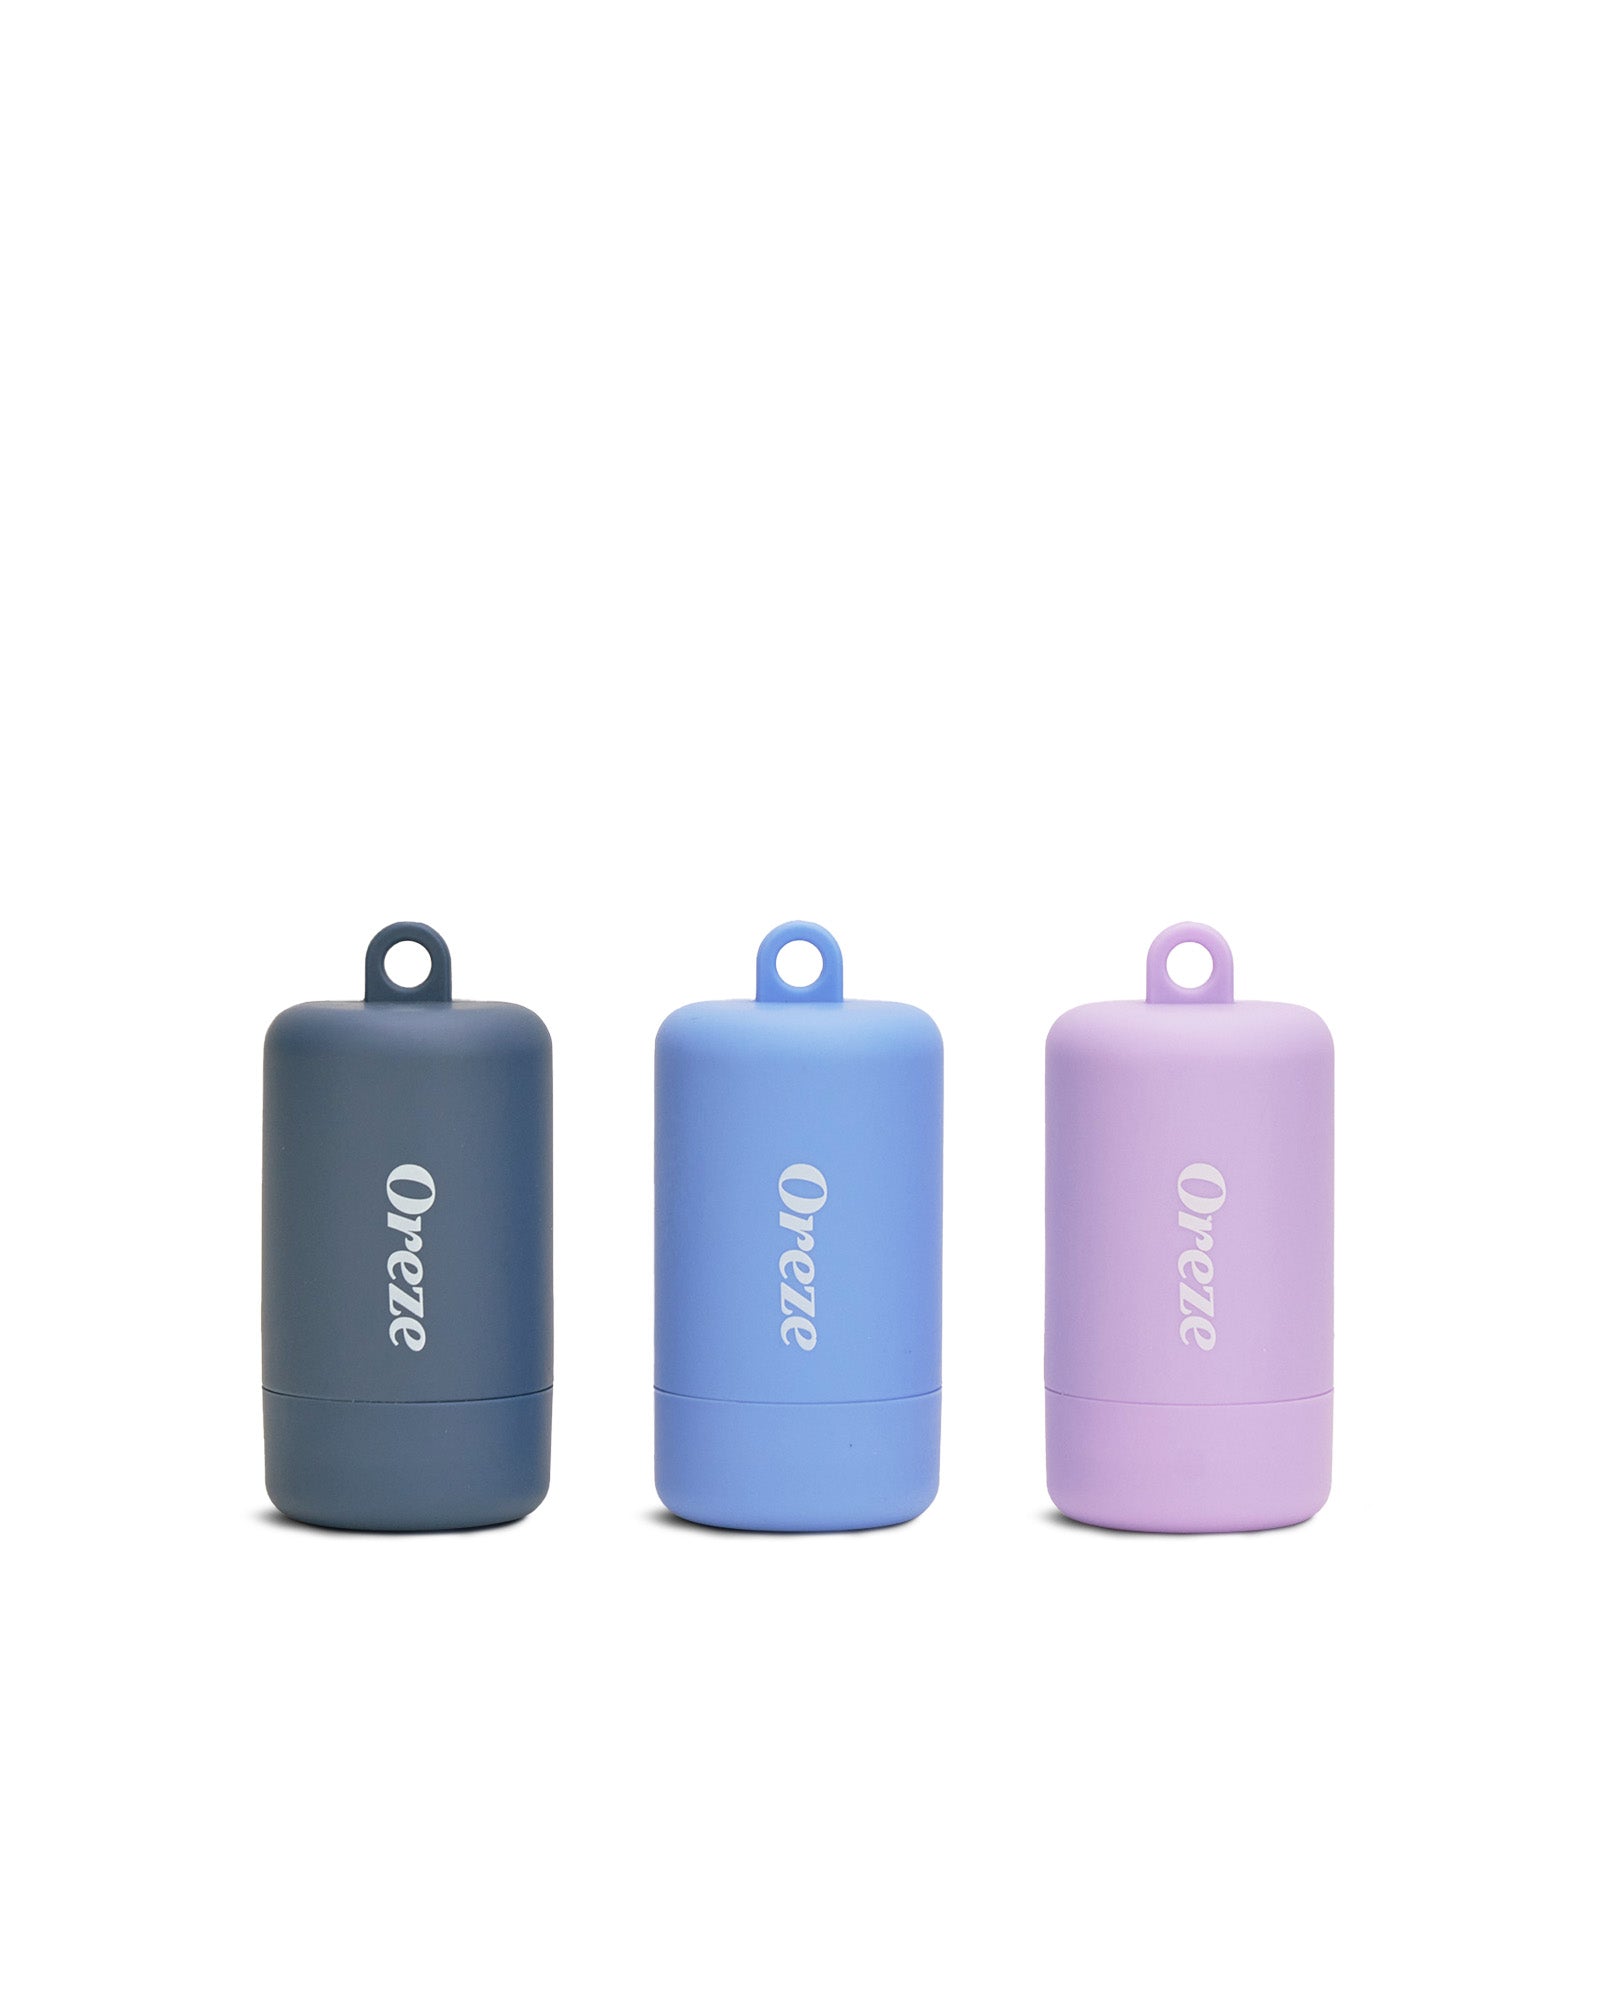 All three colors of Oreze poop bag carriers